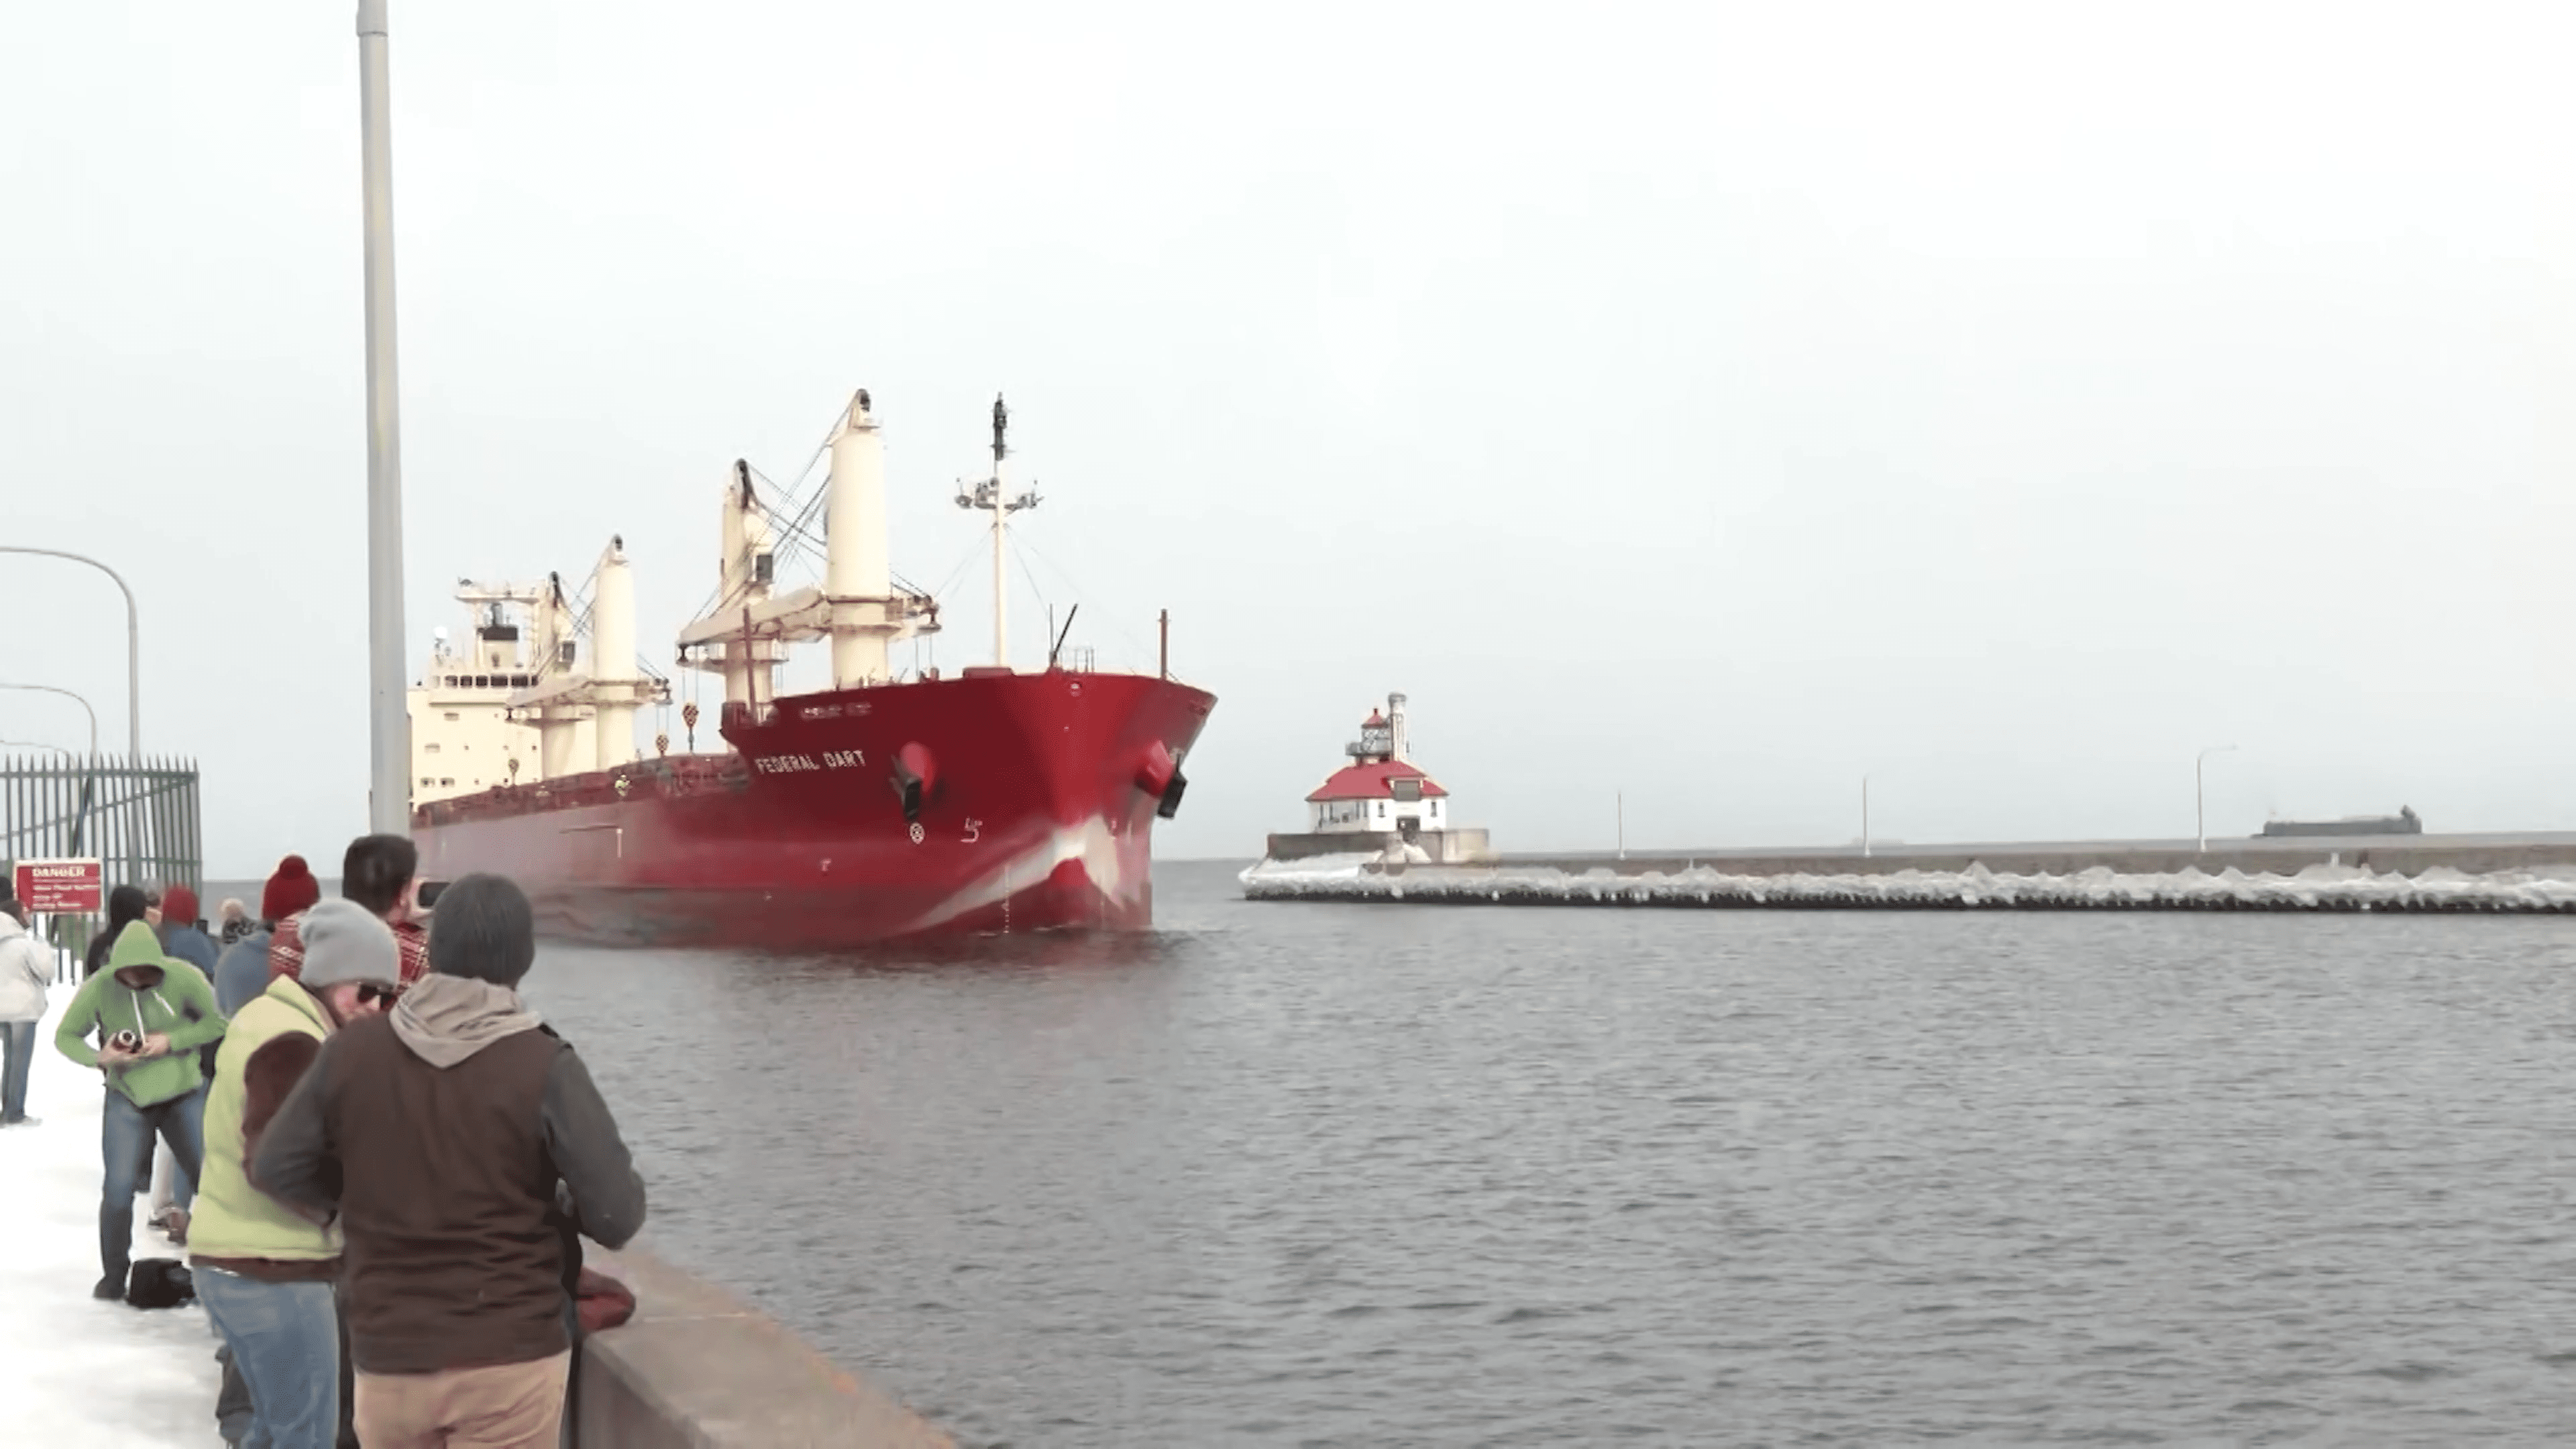 Red saltie ship, the Federal Dart is greeted by onlookers at the Duluth Canal.